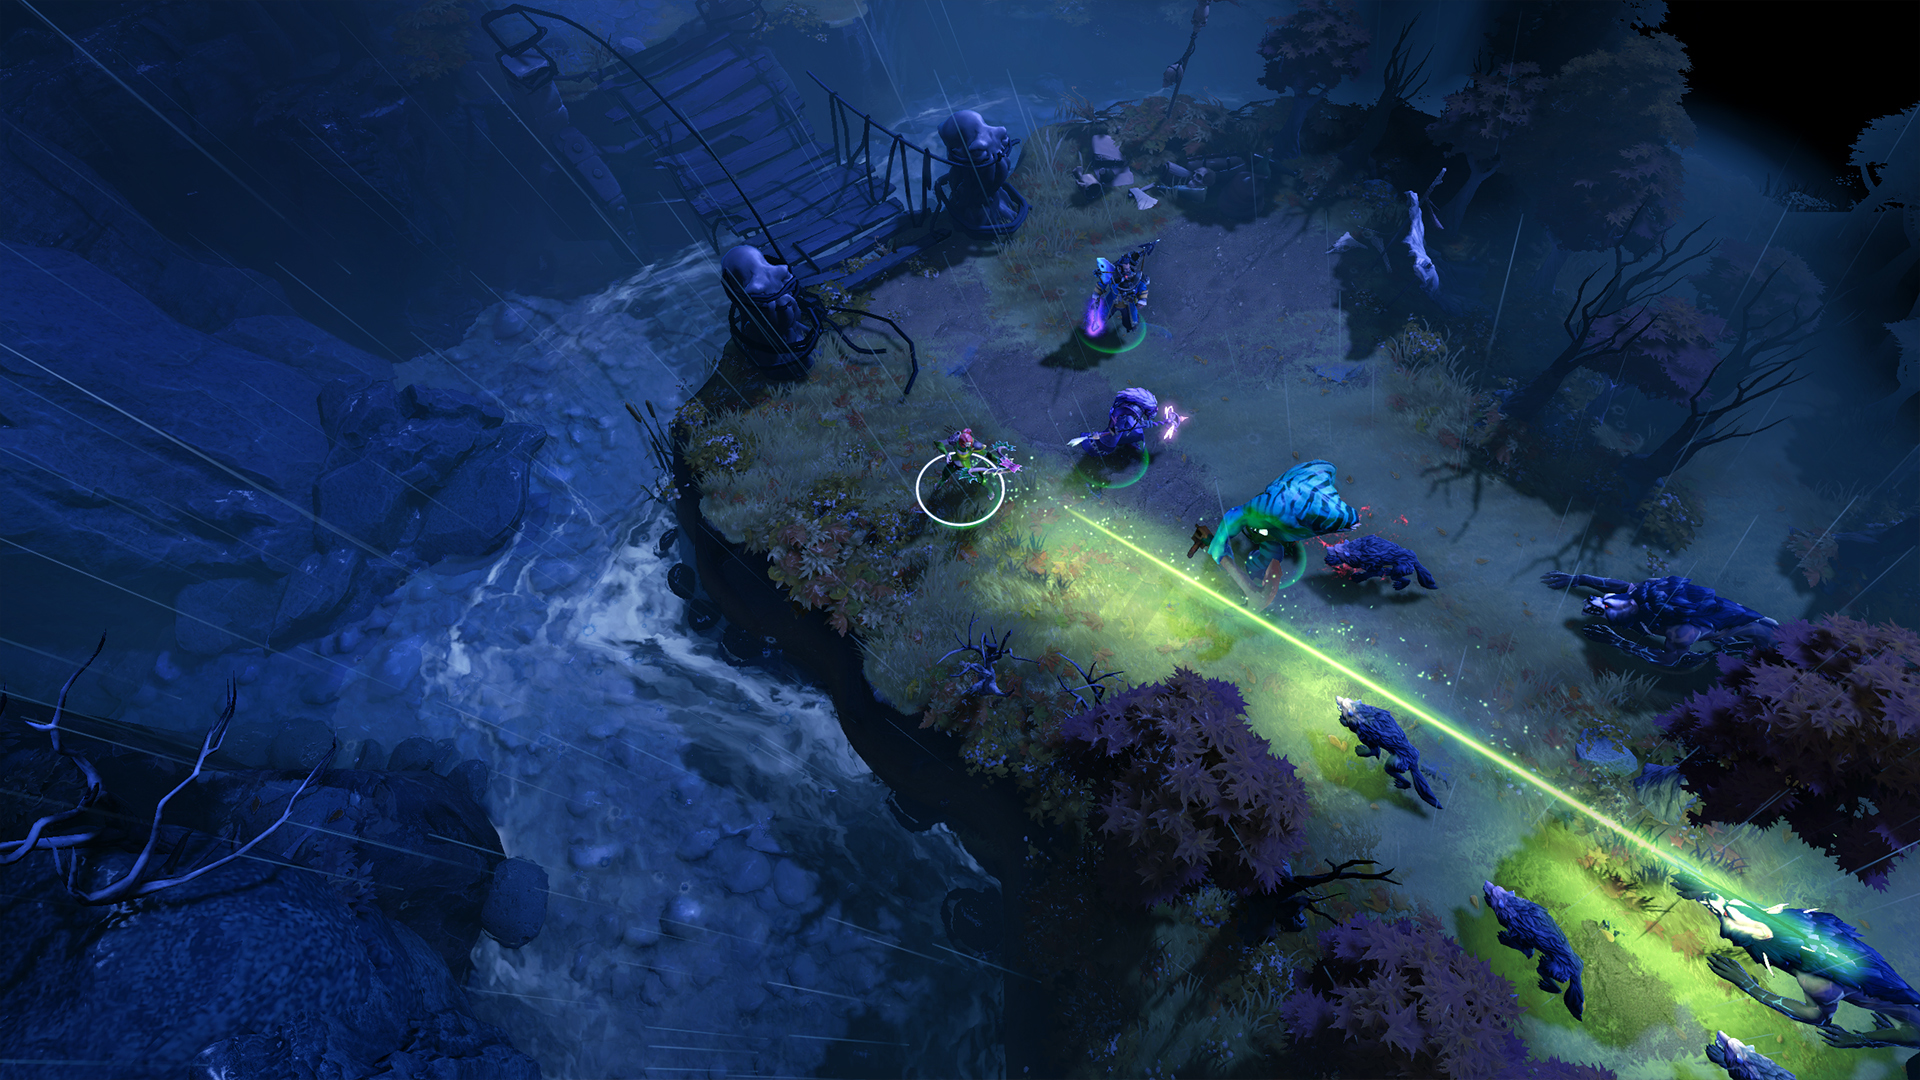 DOTA 2 Is Getting A Co-op Campaign With A Story